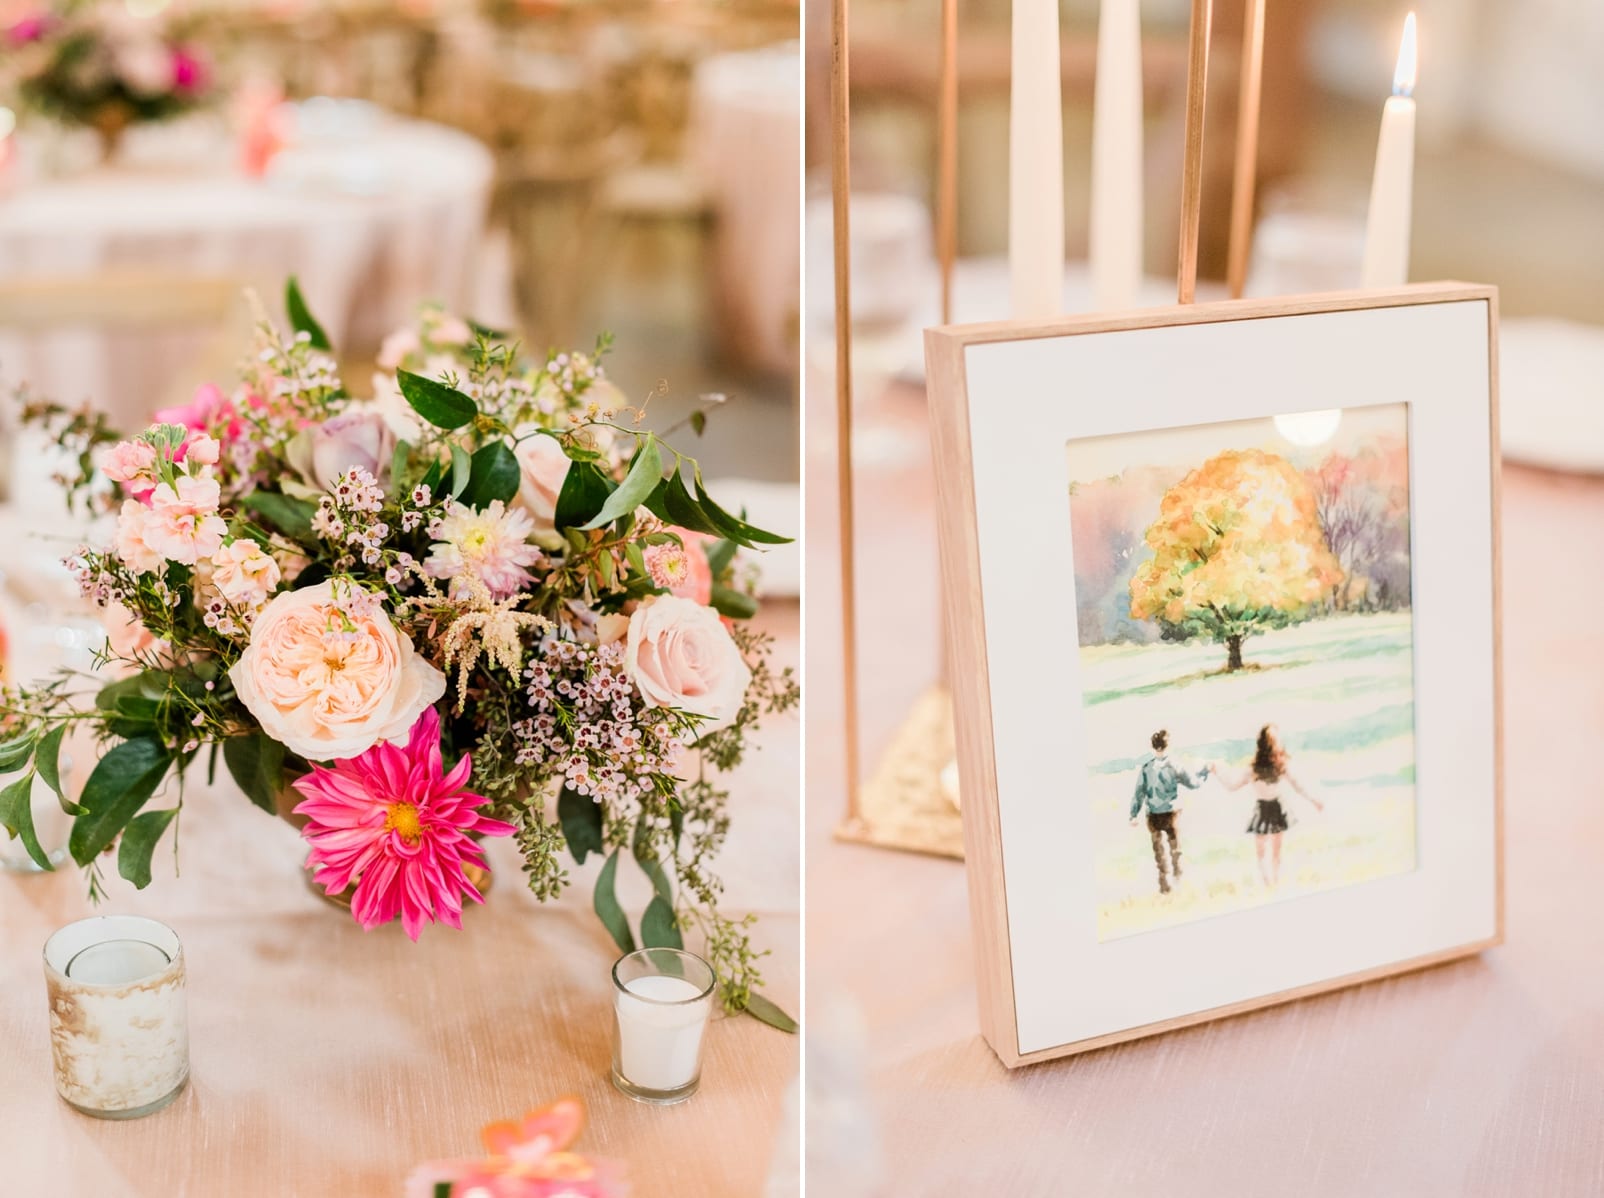 Barn of Chapel Hill reception table with hand painted pictures of the bride and groom photo